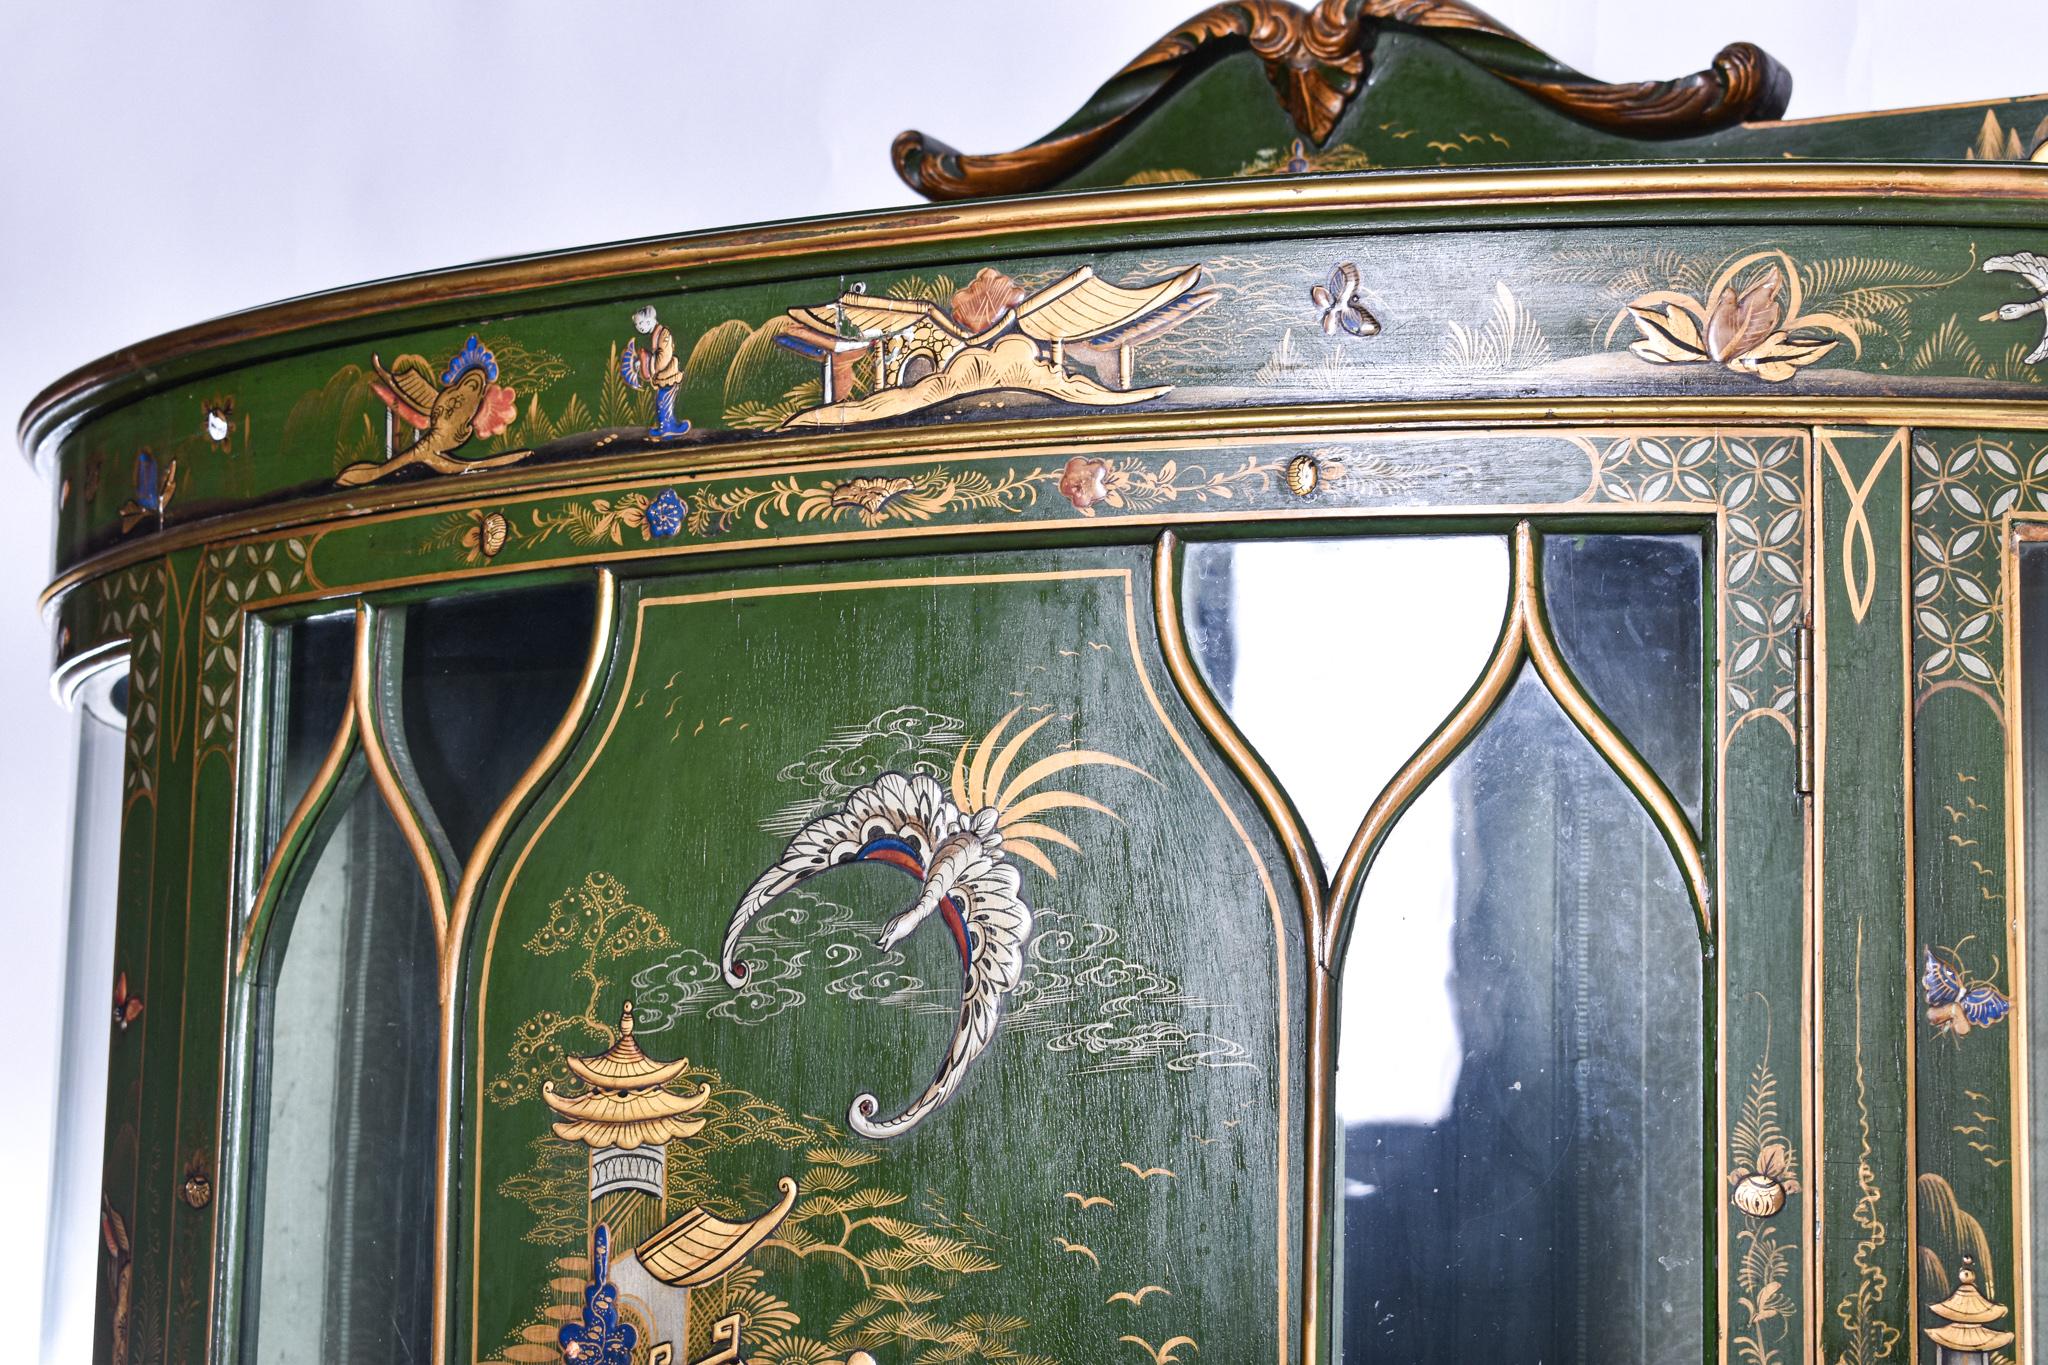 A Early 20th century large and very decorative, bow fronted green Chinoiserie lacquered cabinet. The centre panel displaying a fantastic Chinese scene, with arched gilded edges. Flanked by two glass panelled sections which also have raised, gilded